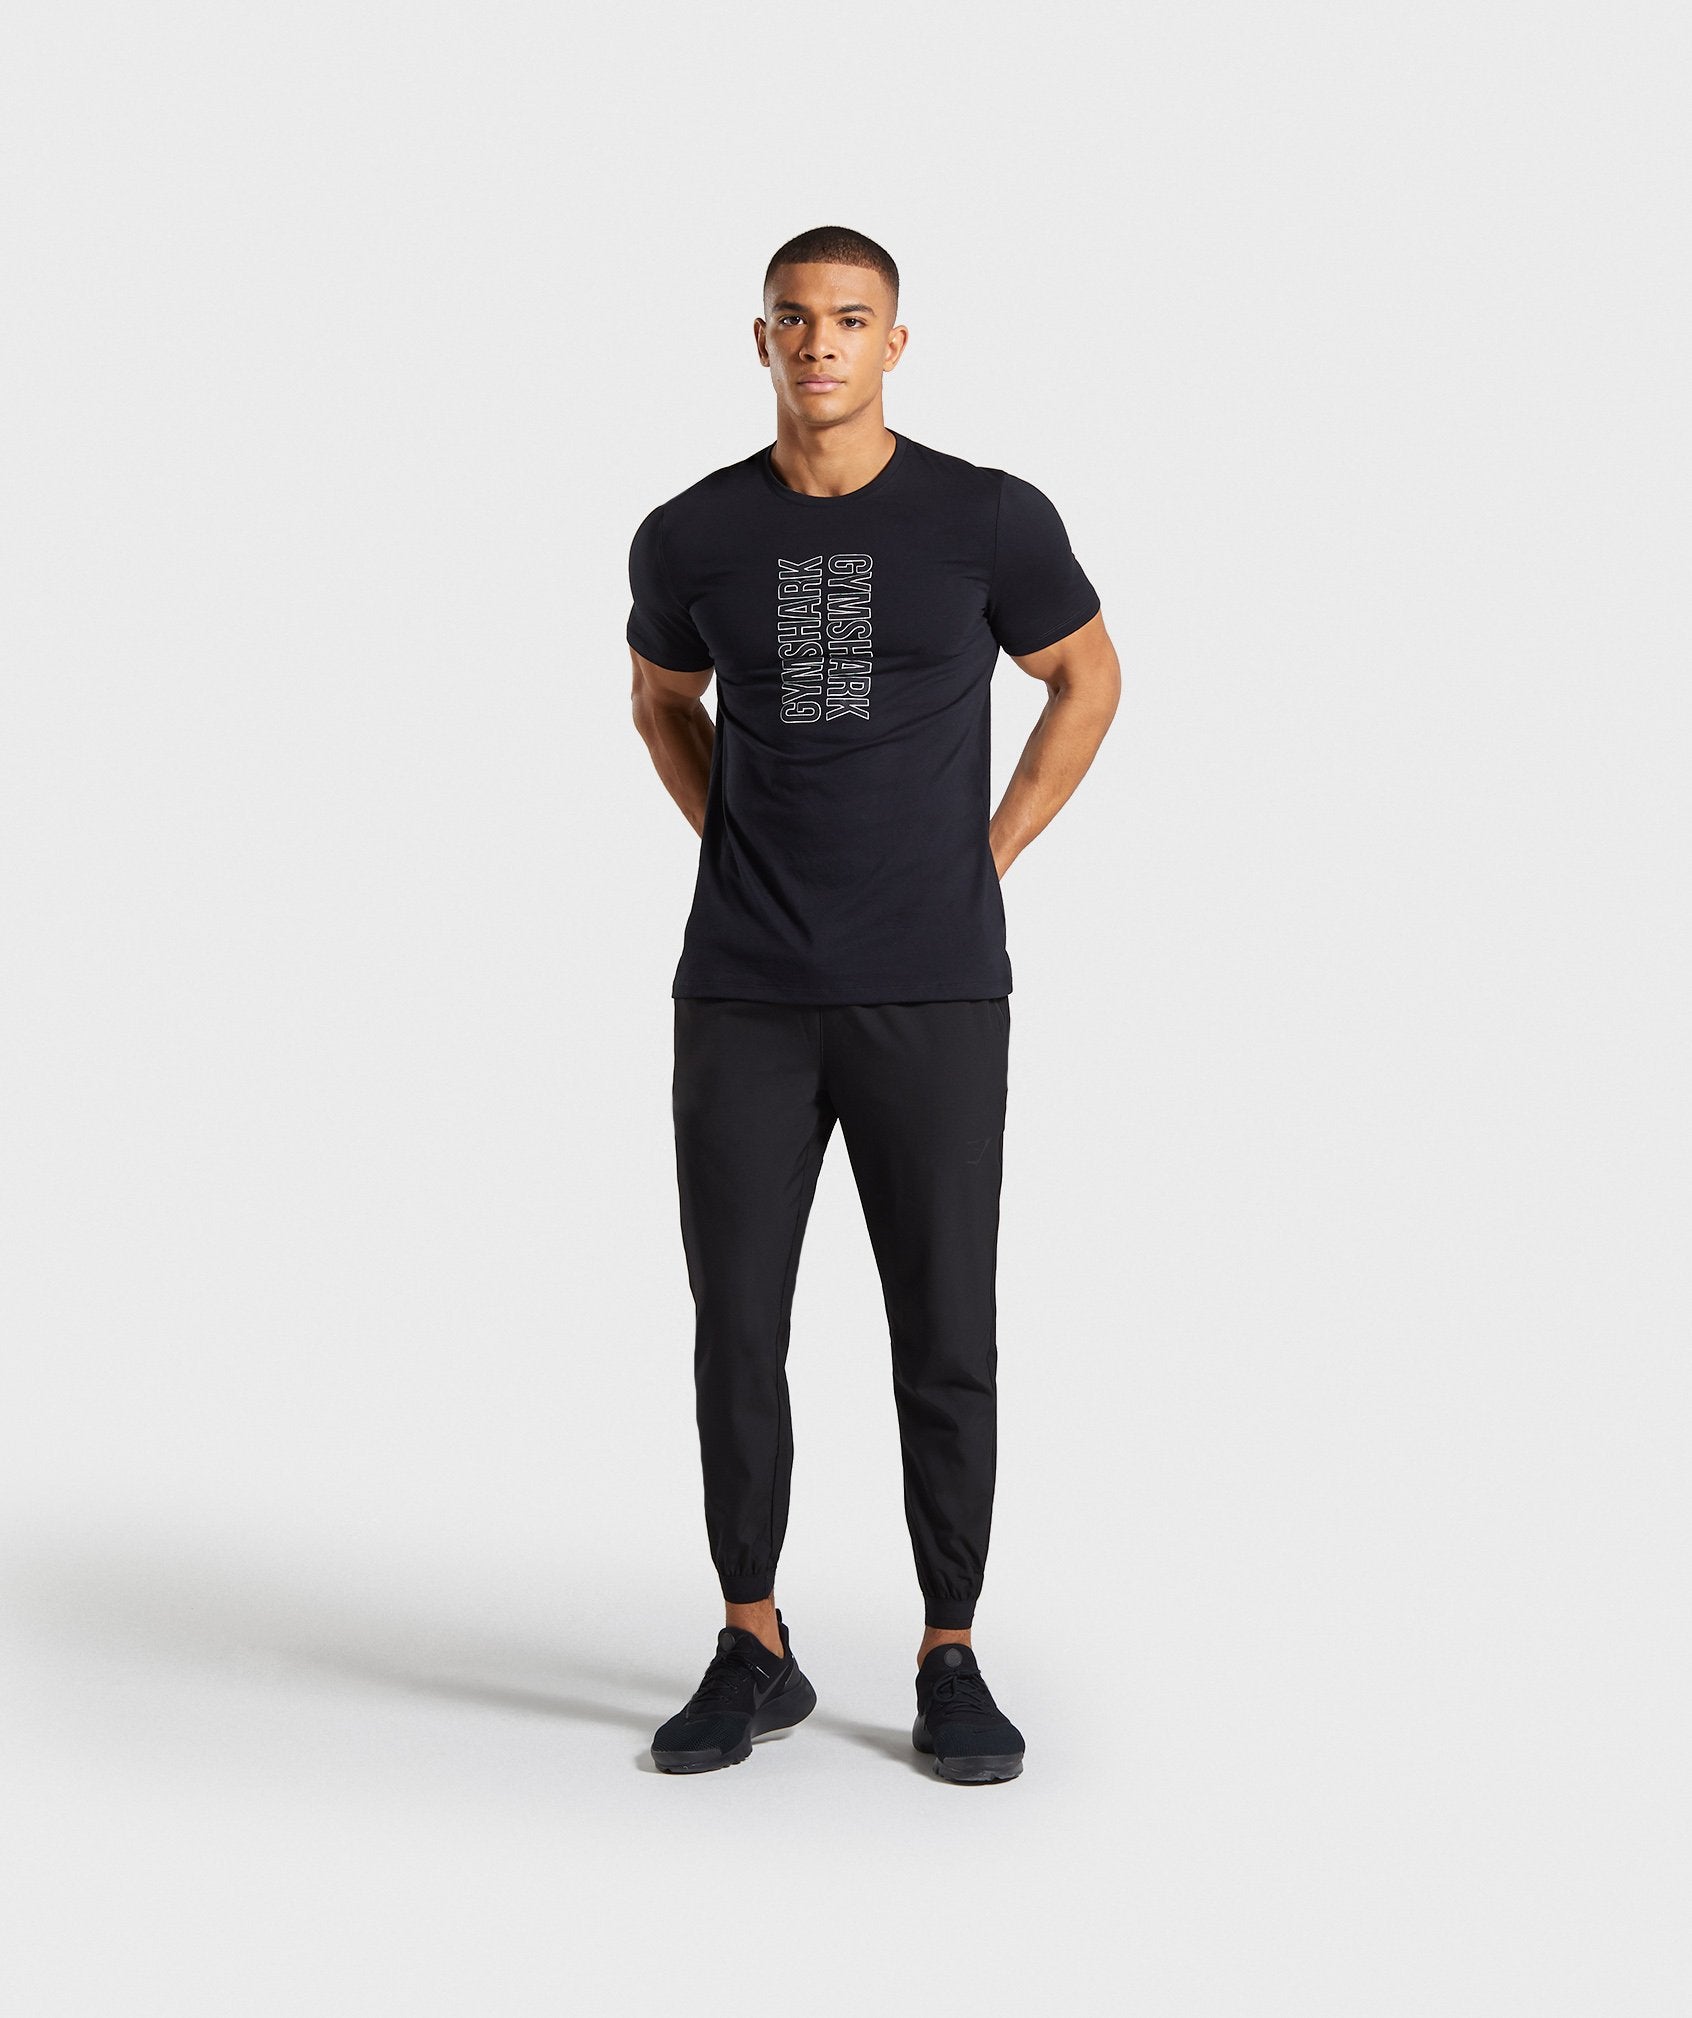 Profile T-Shirt in Black - view 4